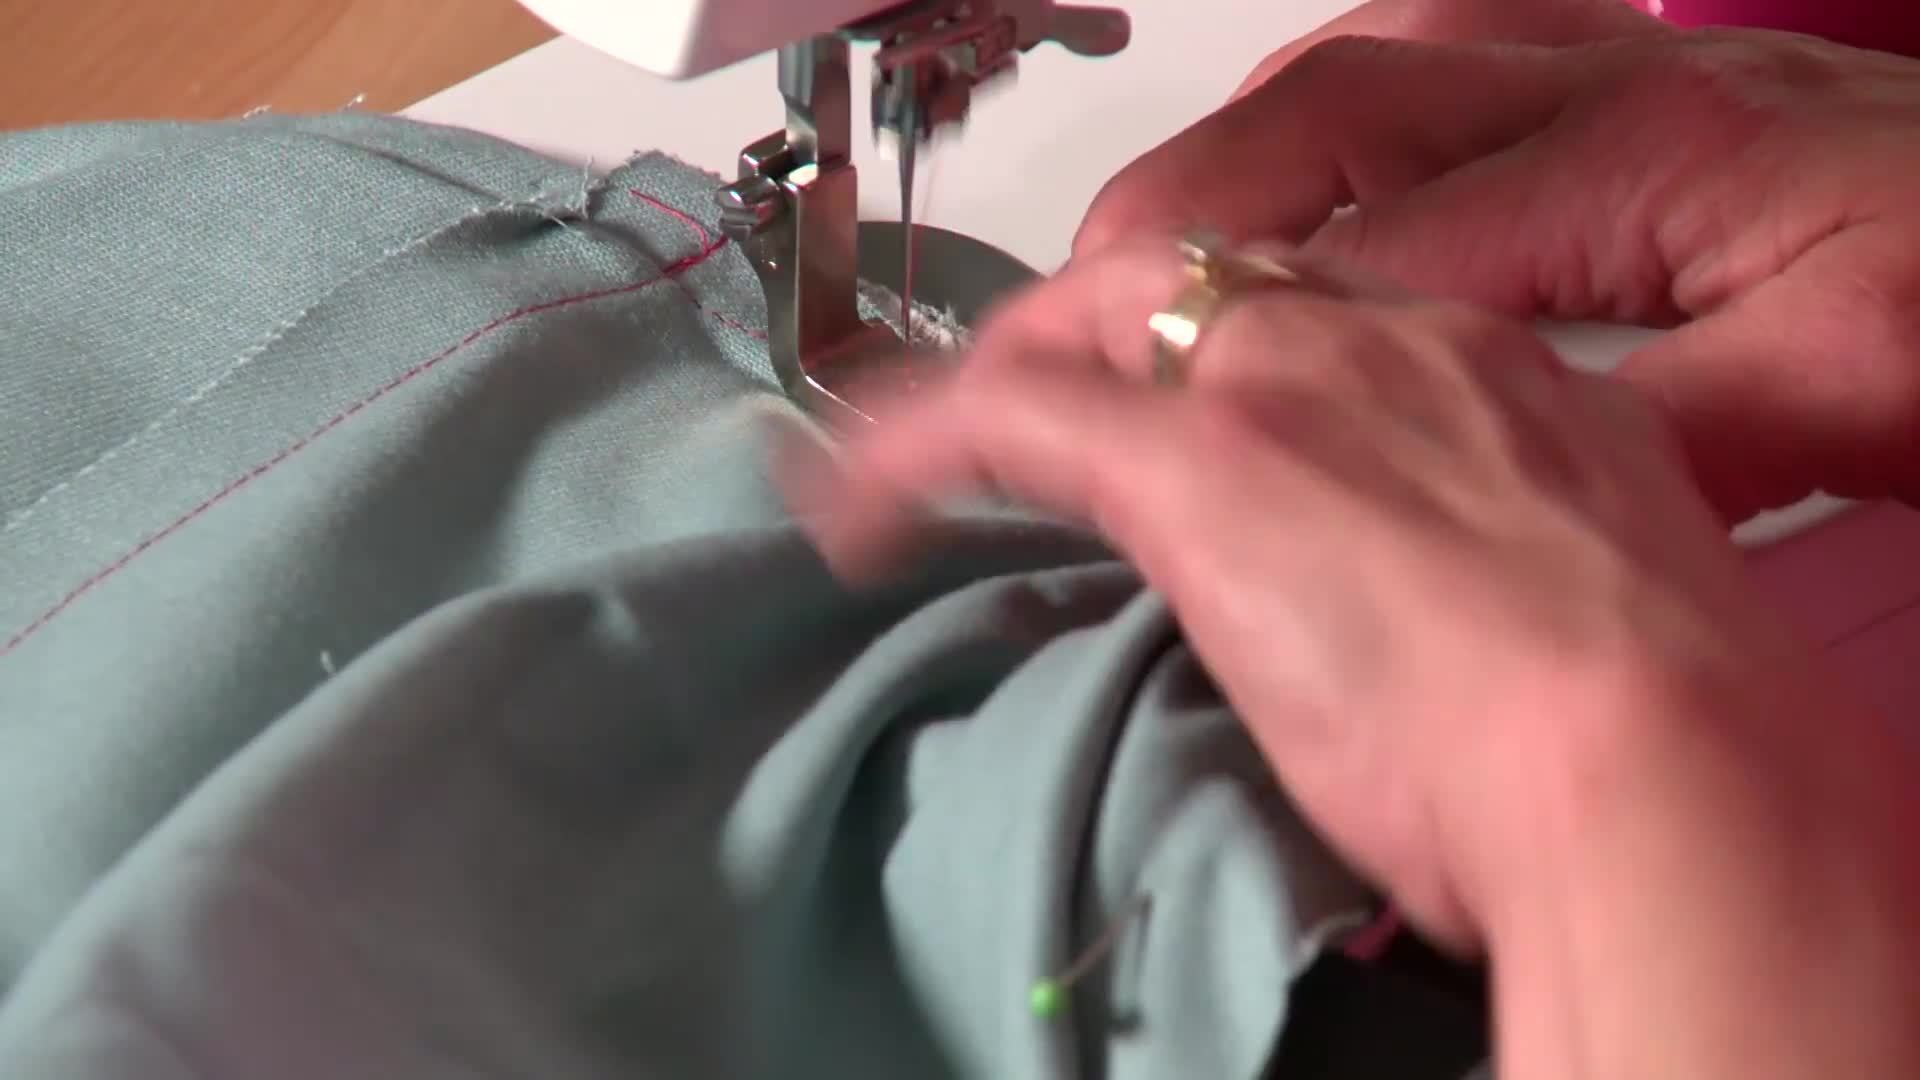 Sewing the Slipcover